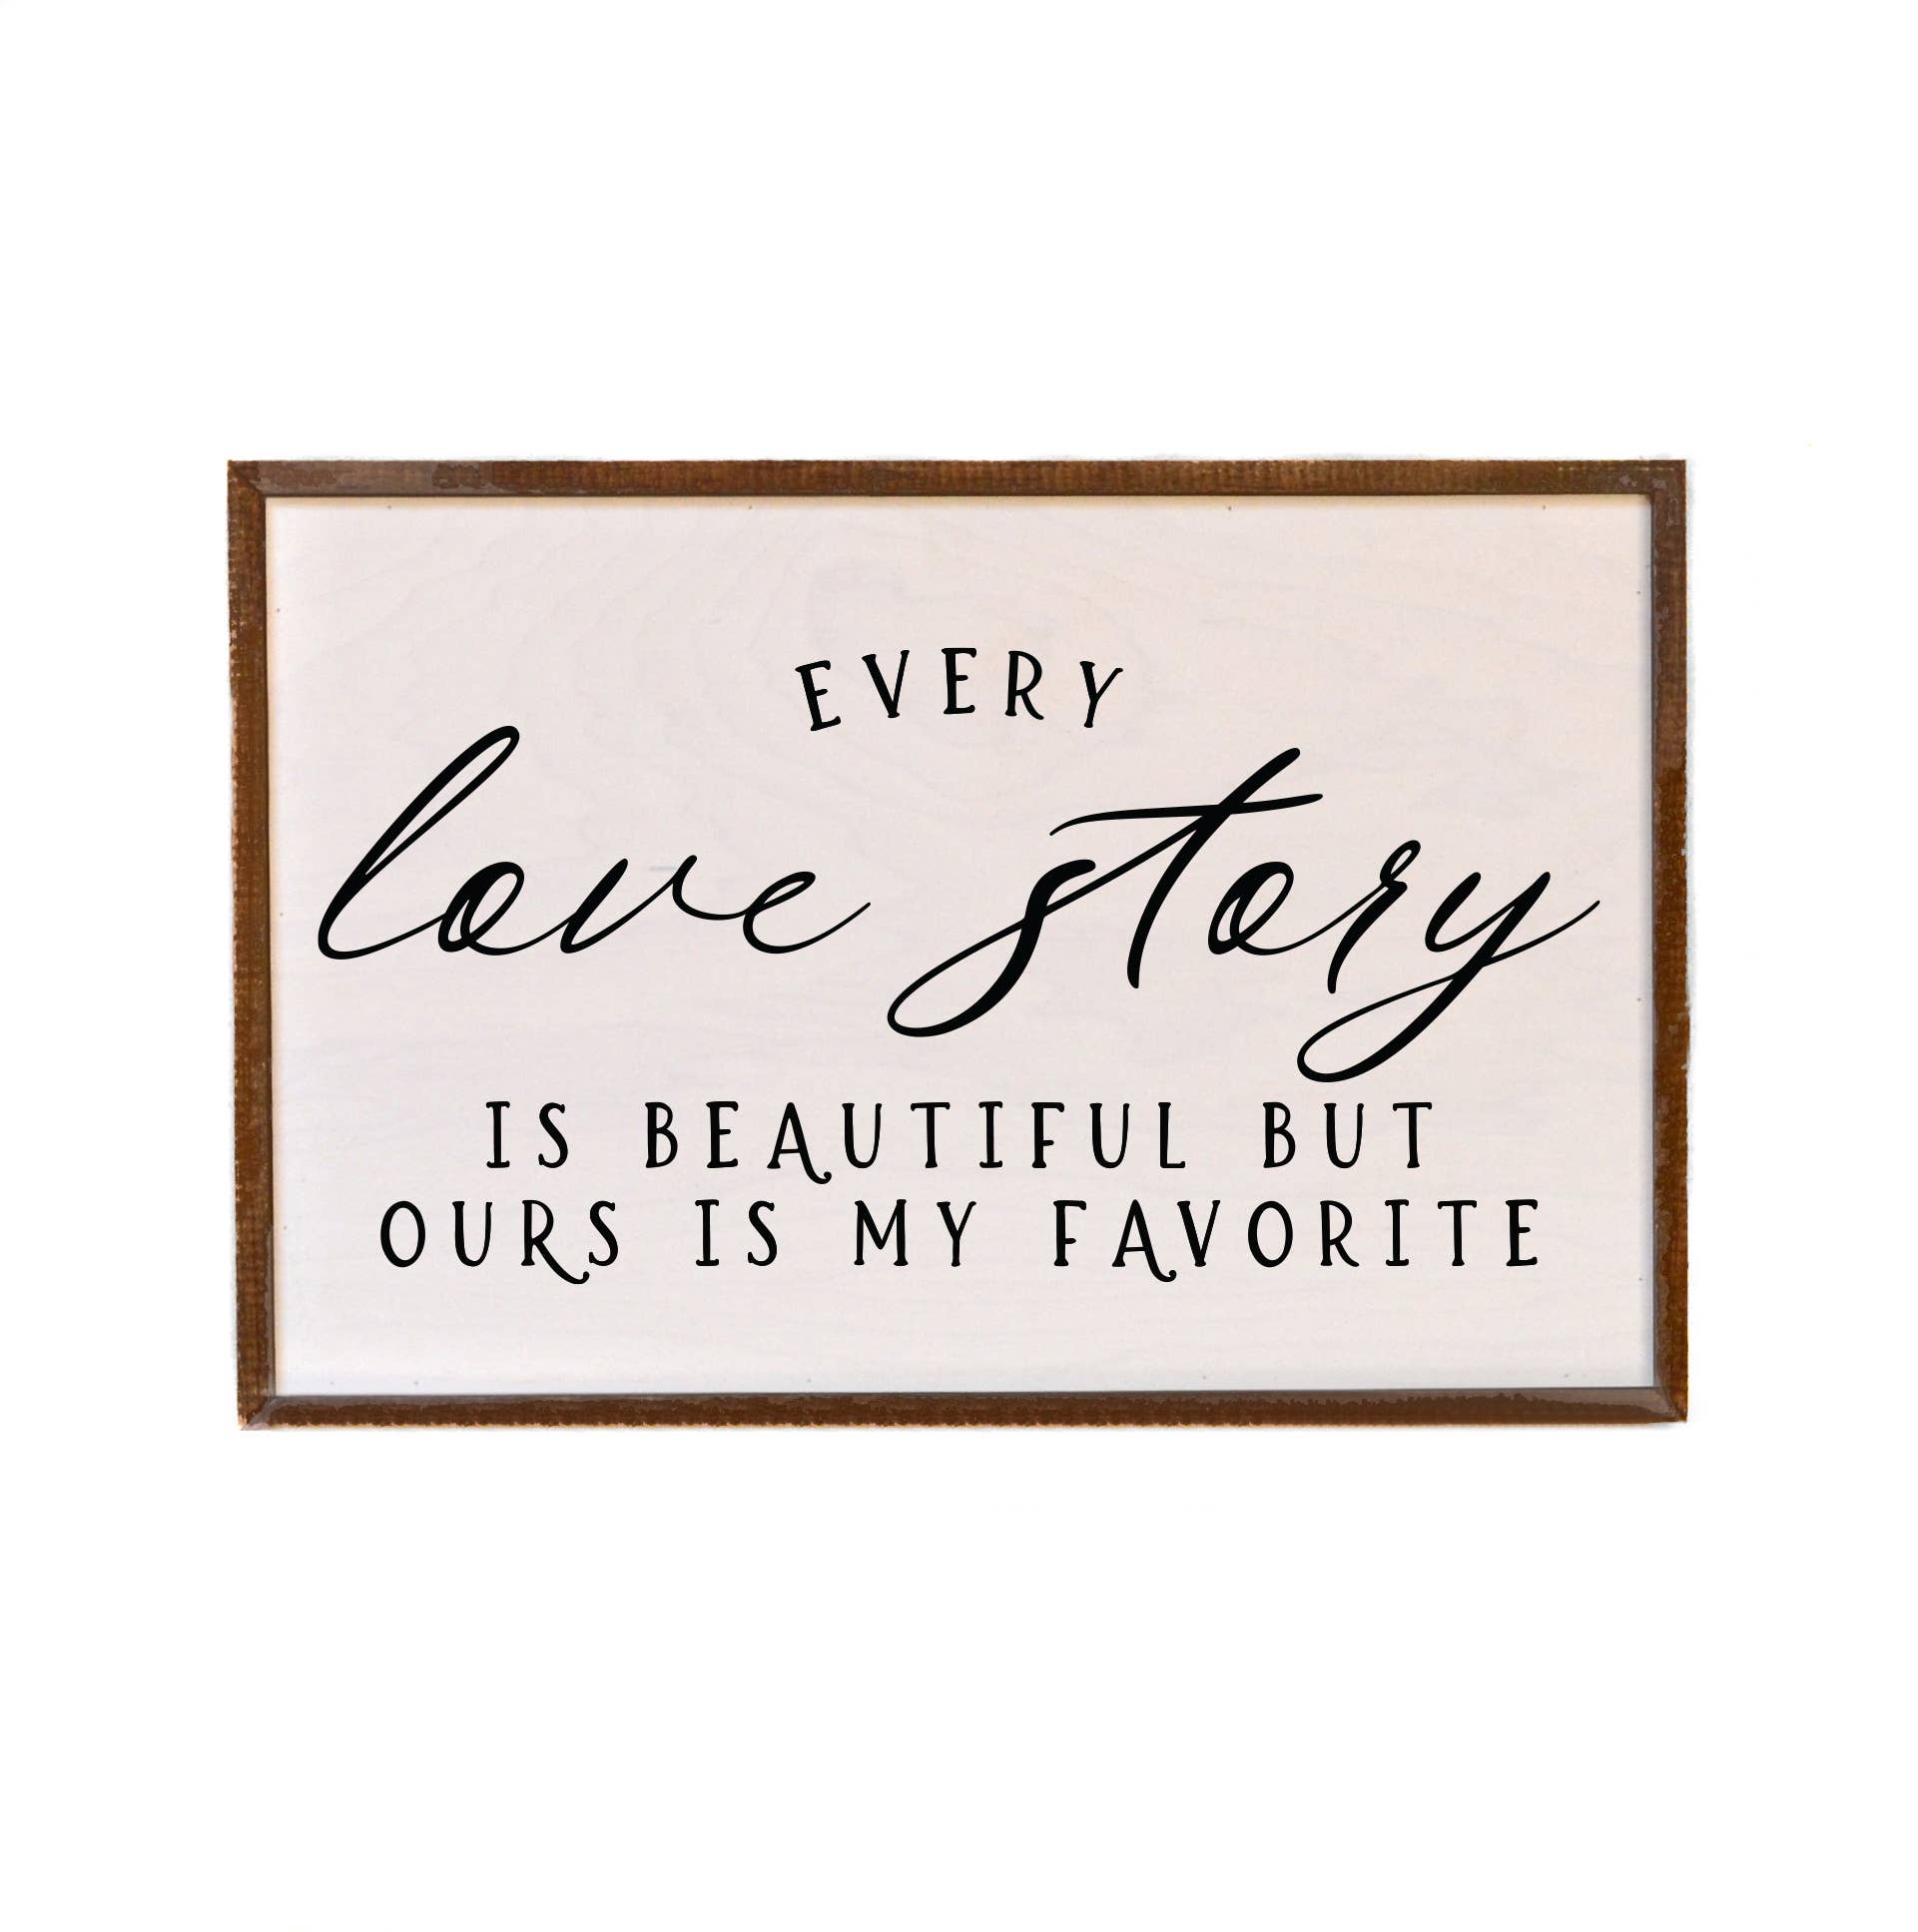 Every Love Story Is Beautiful - 12x18